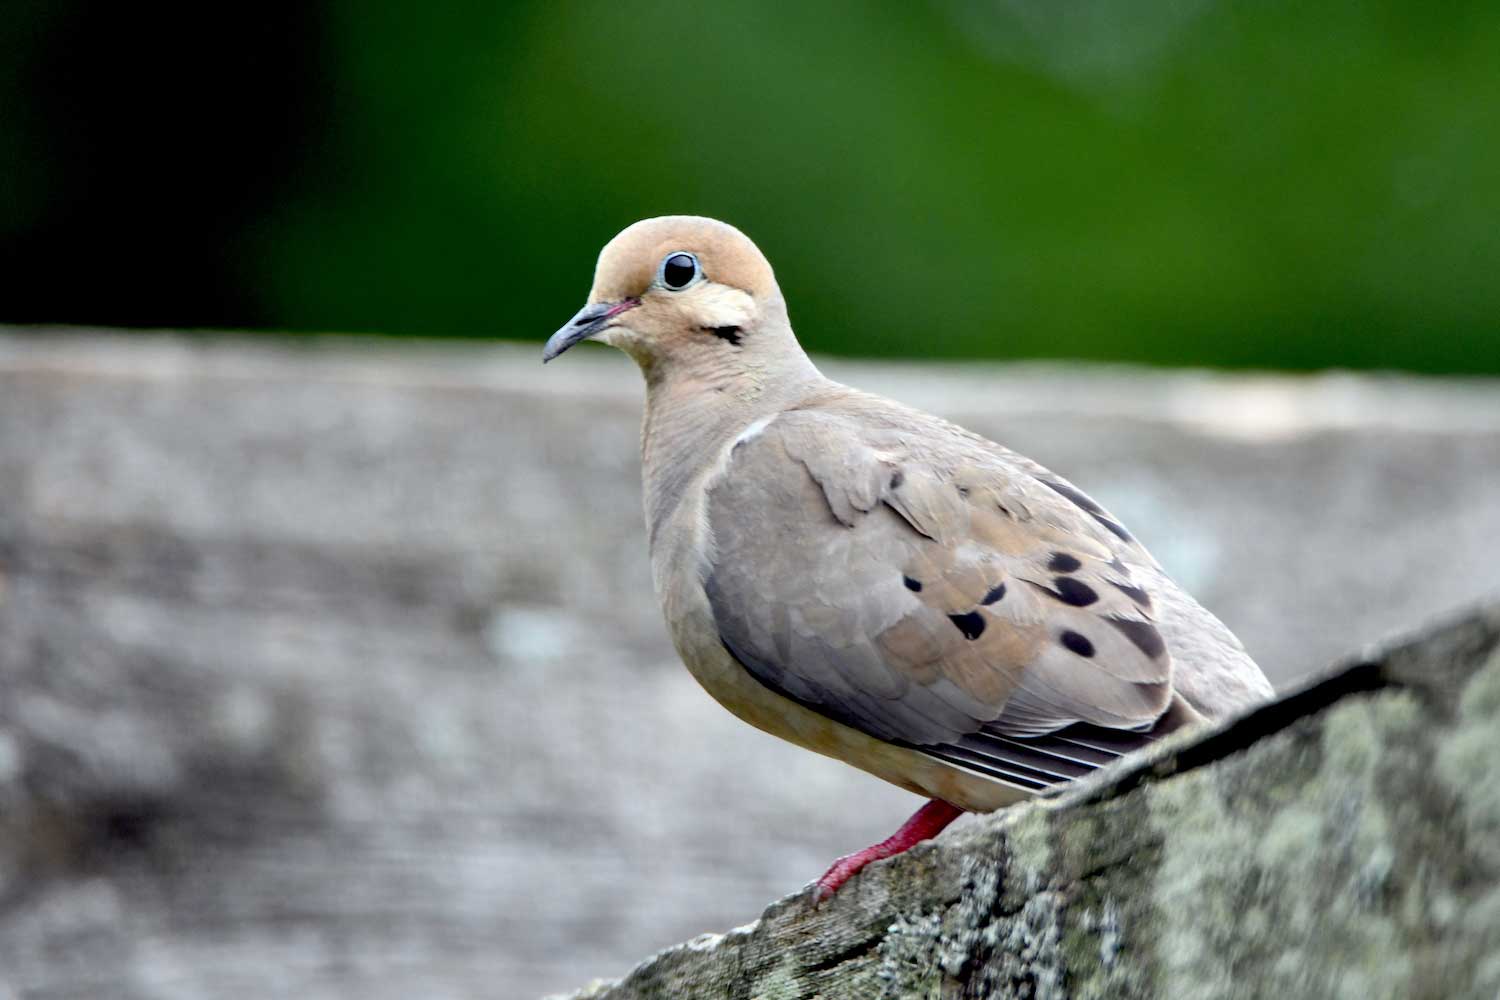 A mourning dove perched on a ledge.